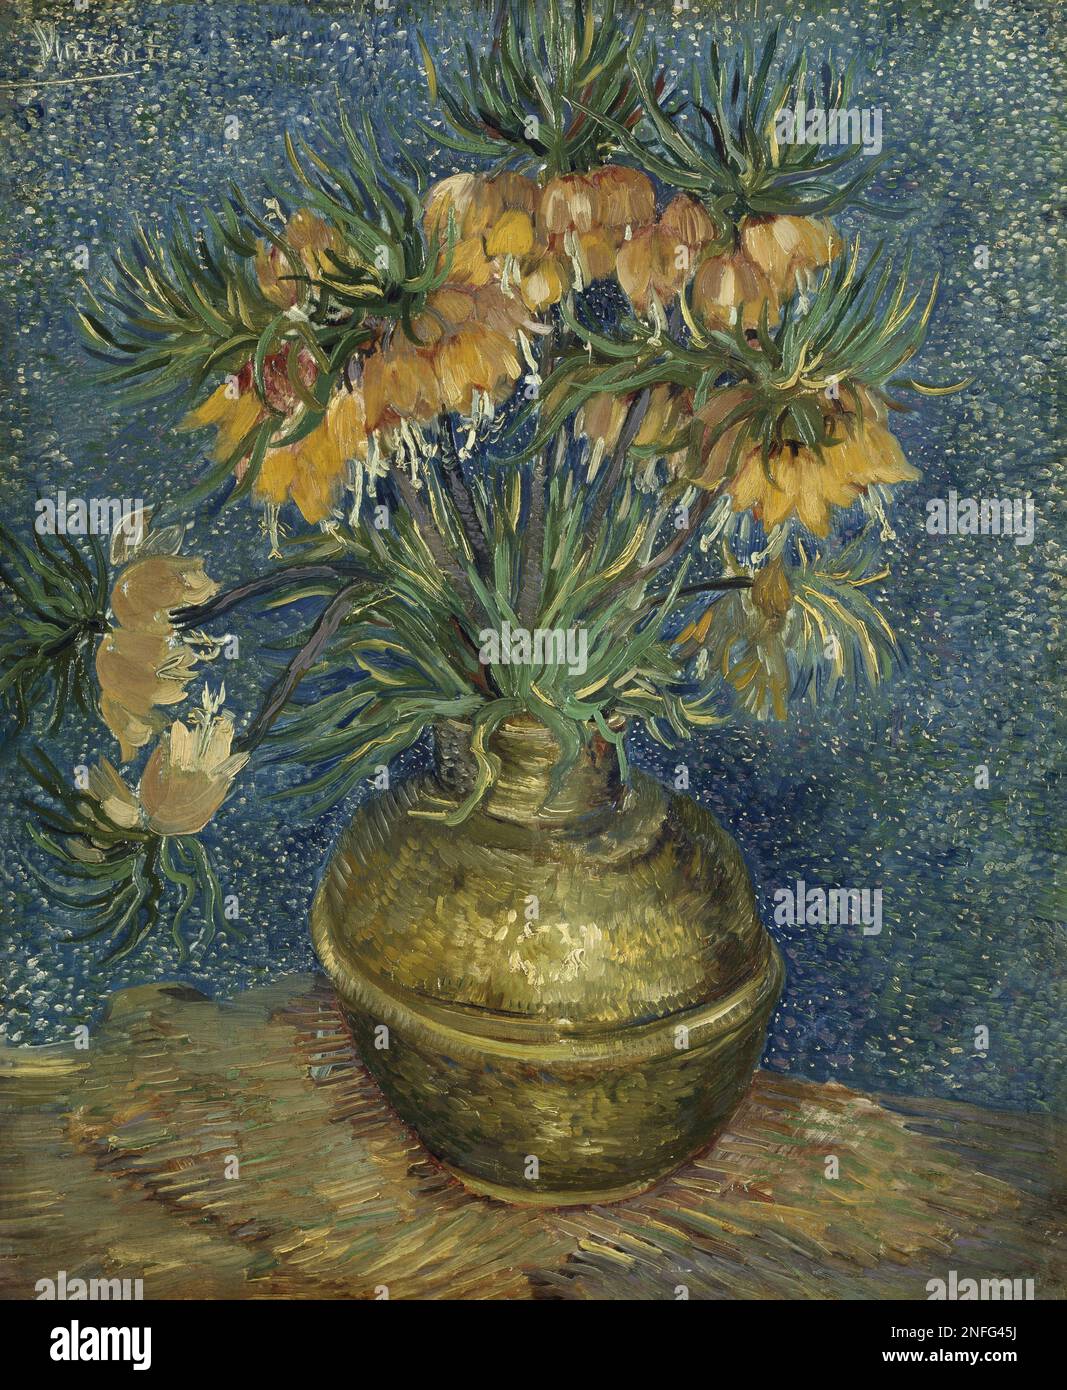 Imperial Fritillaries in a Copper Vase Stock Photo